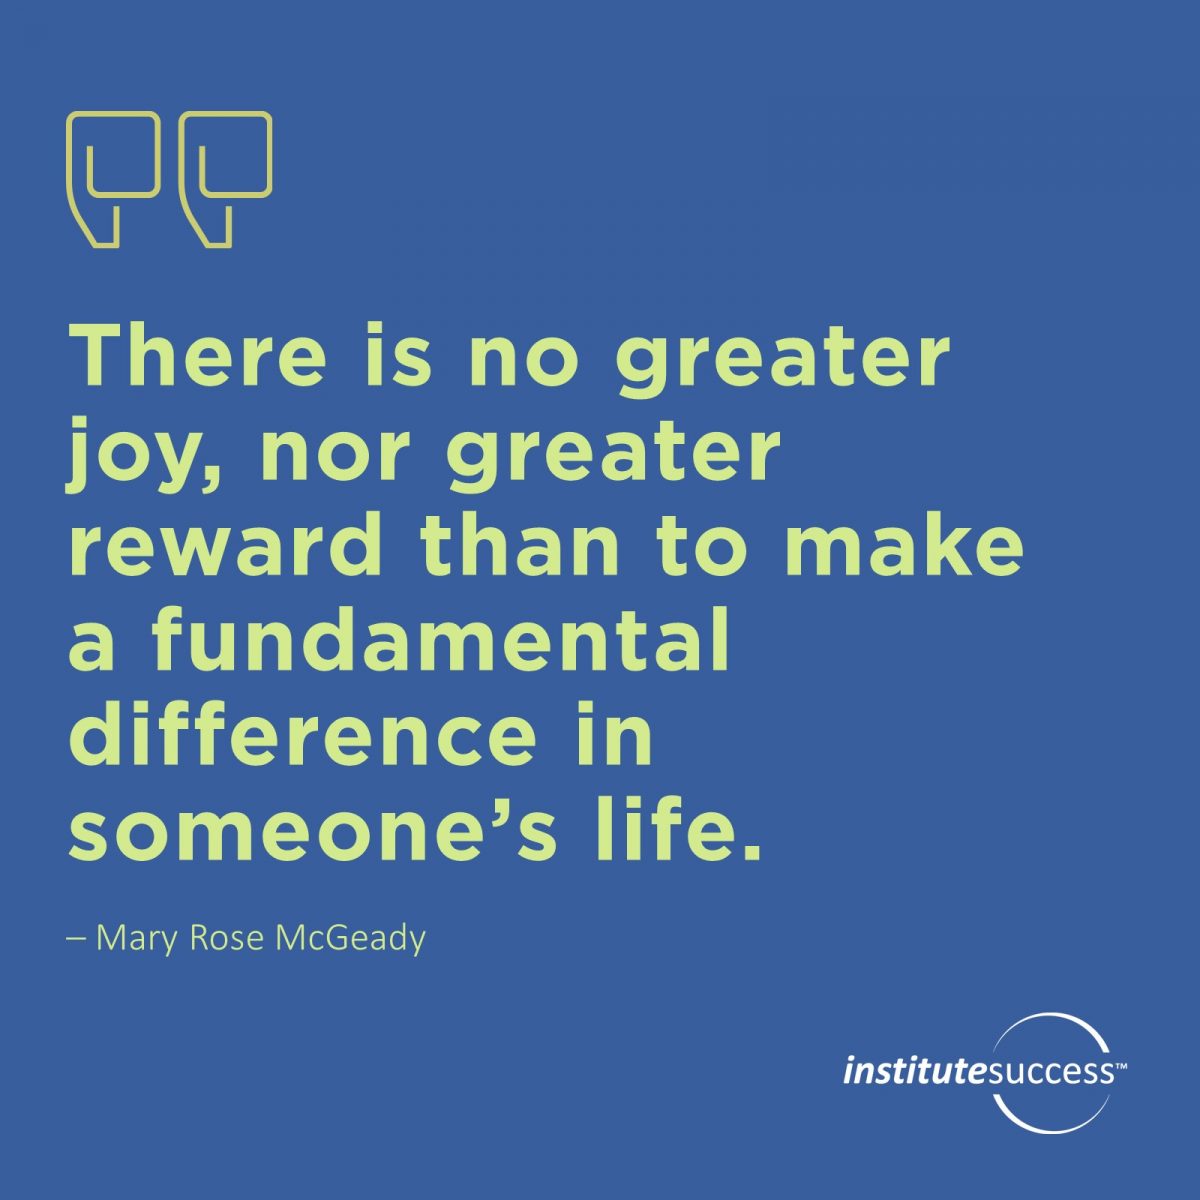 There is no greater joy, nor greater reward than to make a fundamental difference in someone’s life. – Mary Rose McGeady